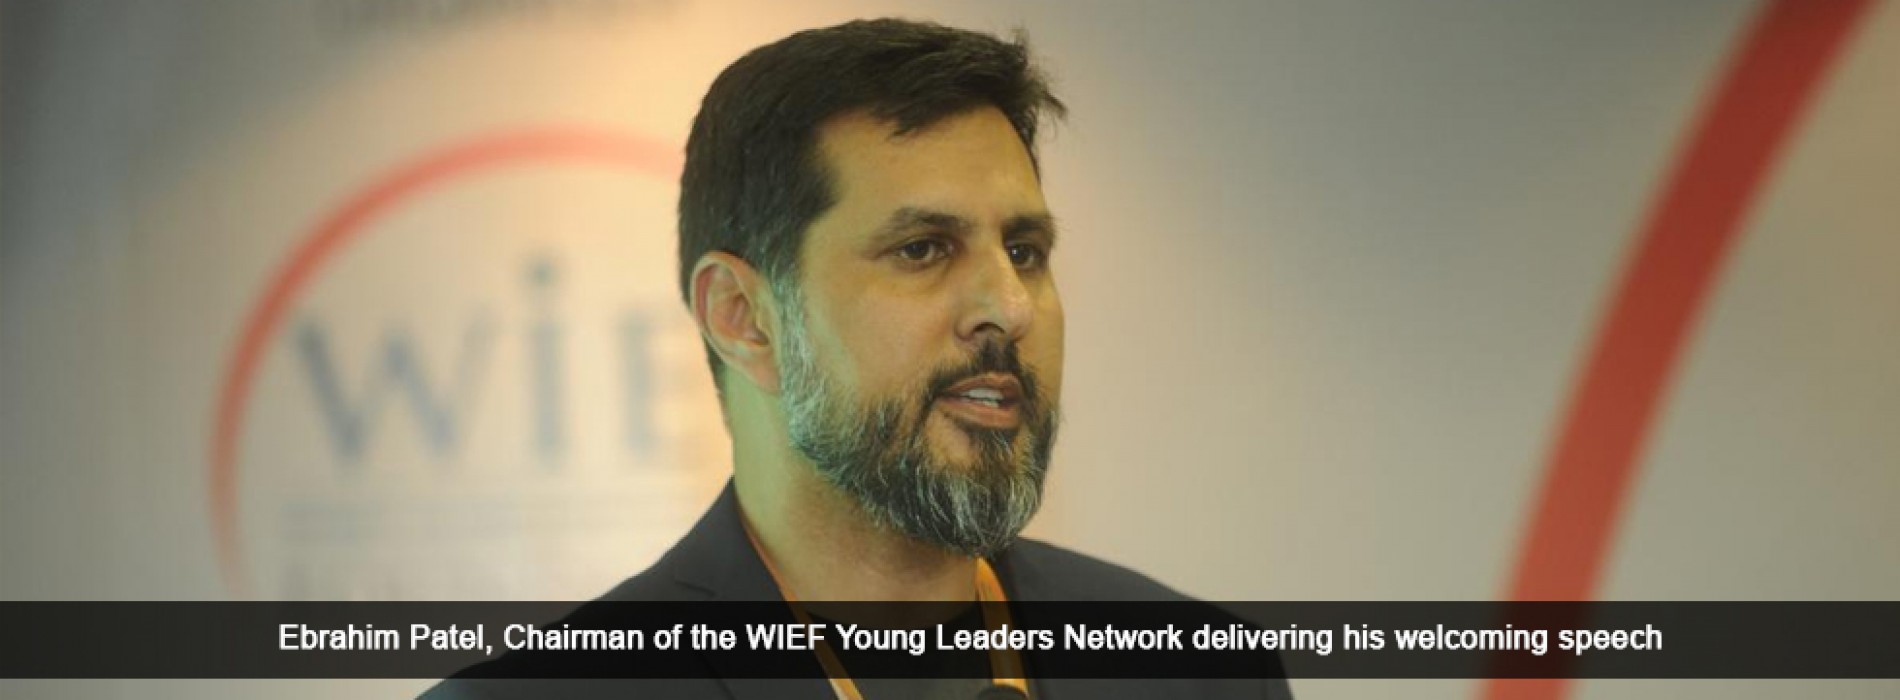 3rd edition of WIEF IdeaLab aims to strengthen the ASEAN Entrepreneurship Ecosystem